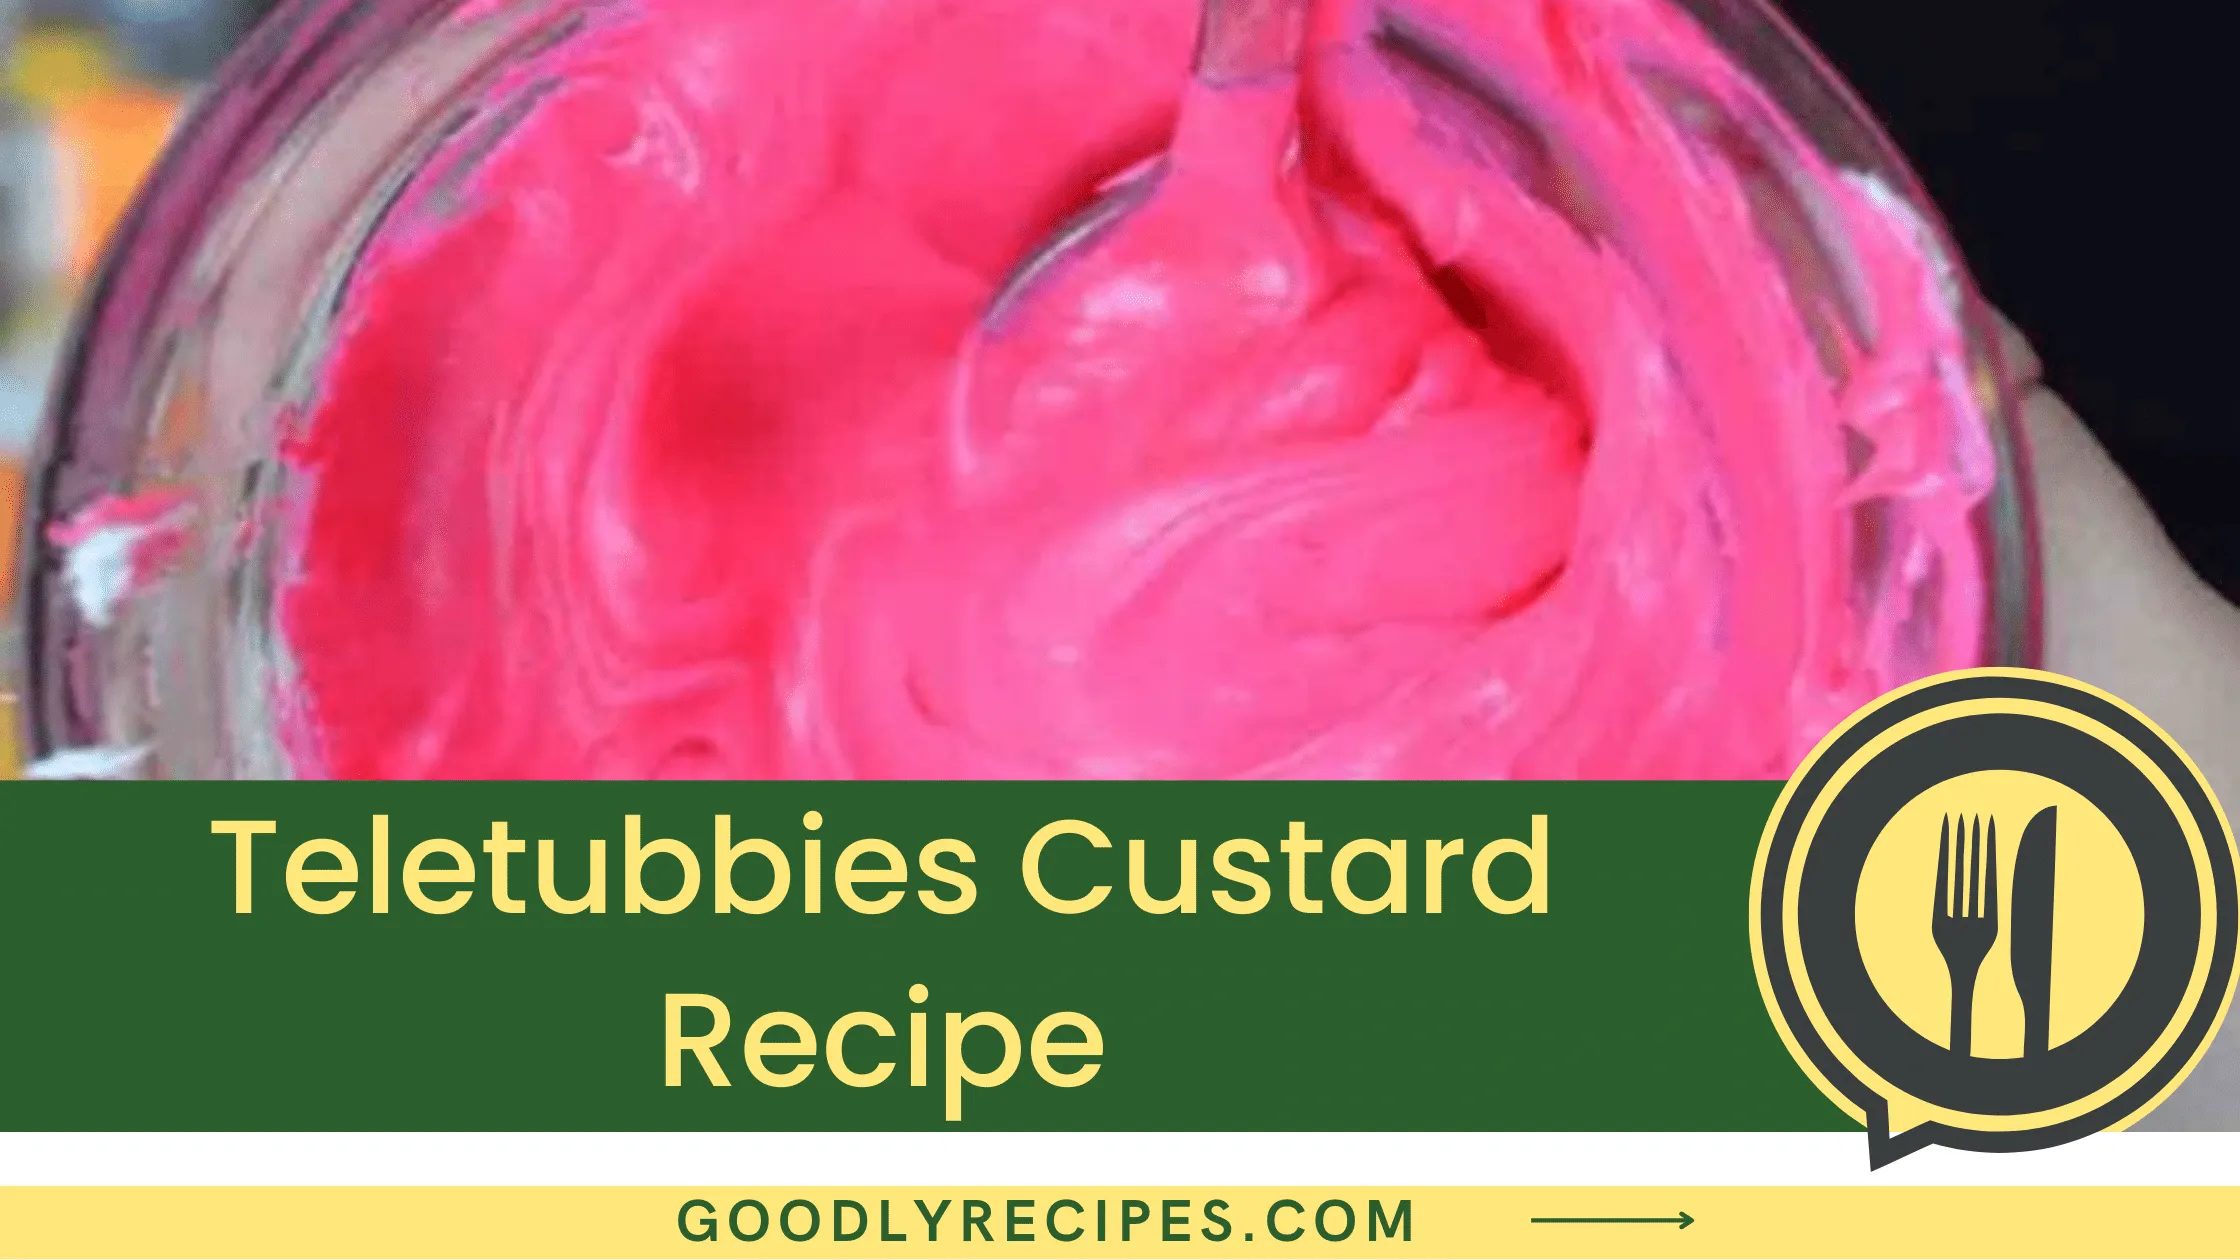 Teletubbies Custard Recipe - For Food Lovers